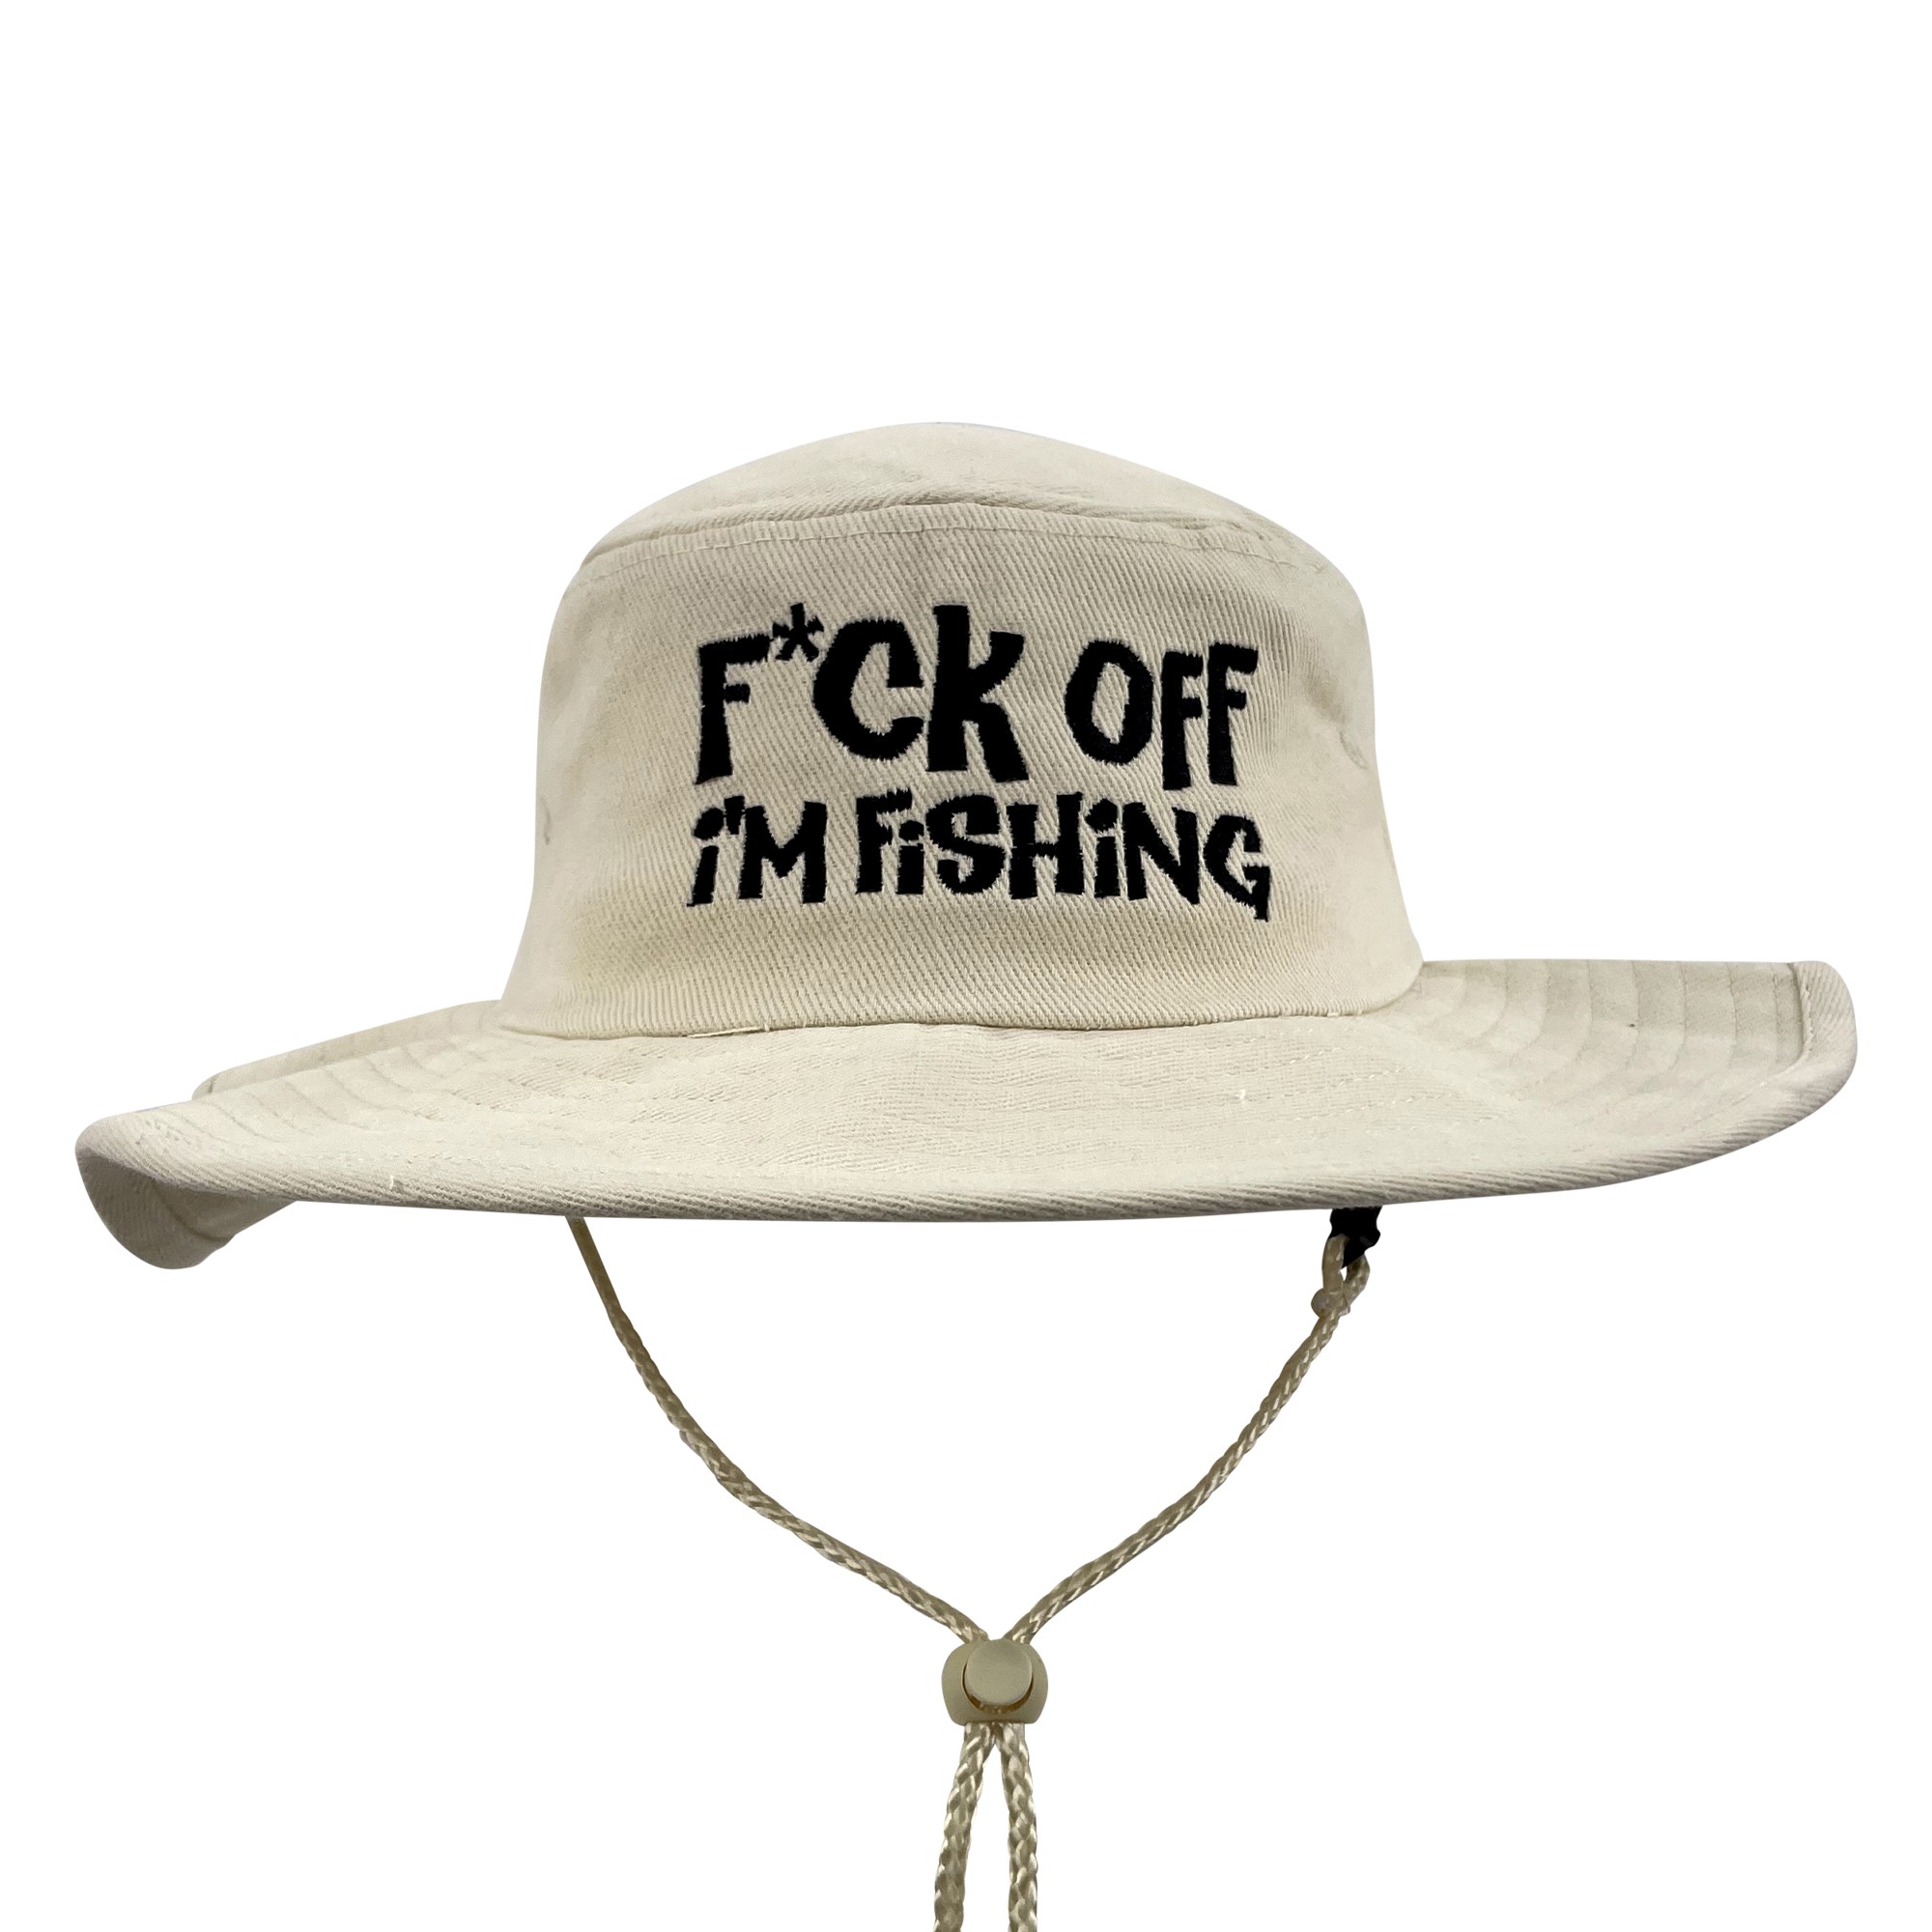 https://www.unclereco.com/catalog/images/products/8049-F_OFF_IM_FISHING_NATURAL_WIDE_BRIM_HAT.jpg